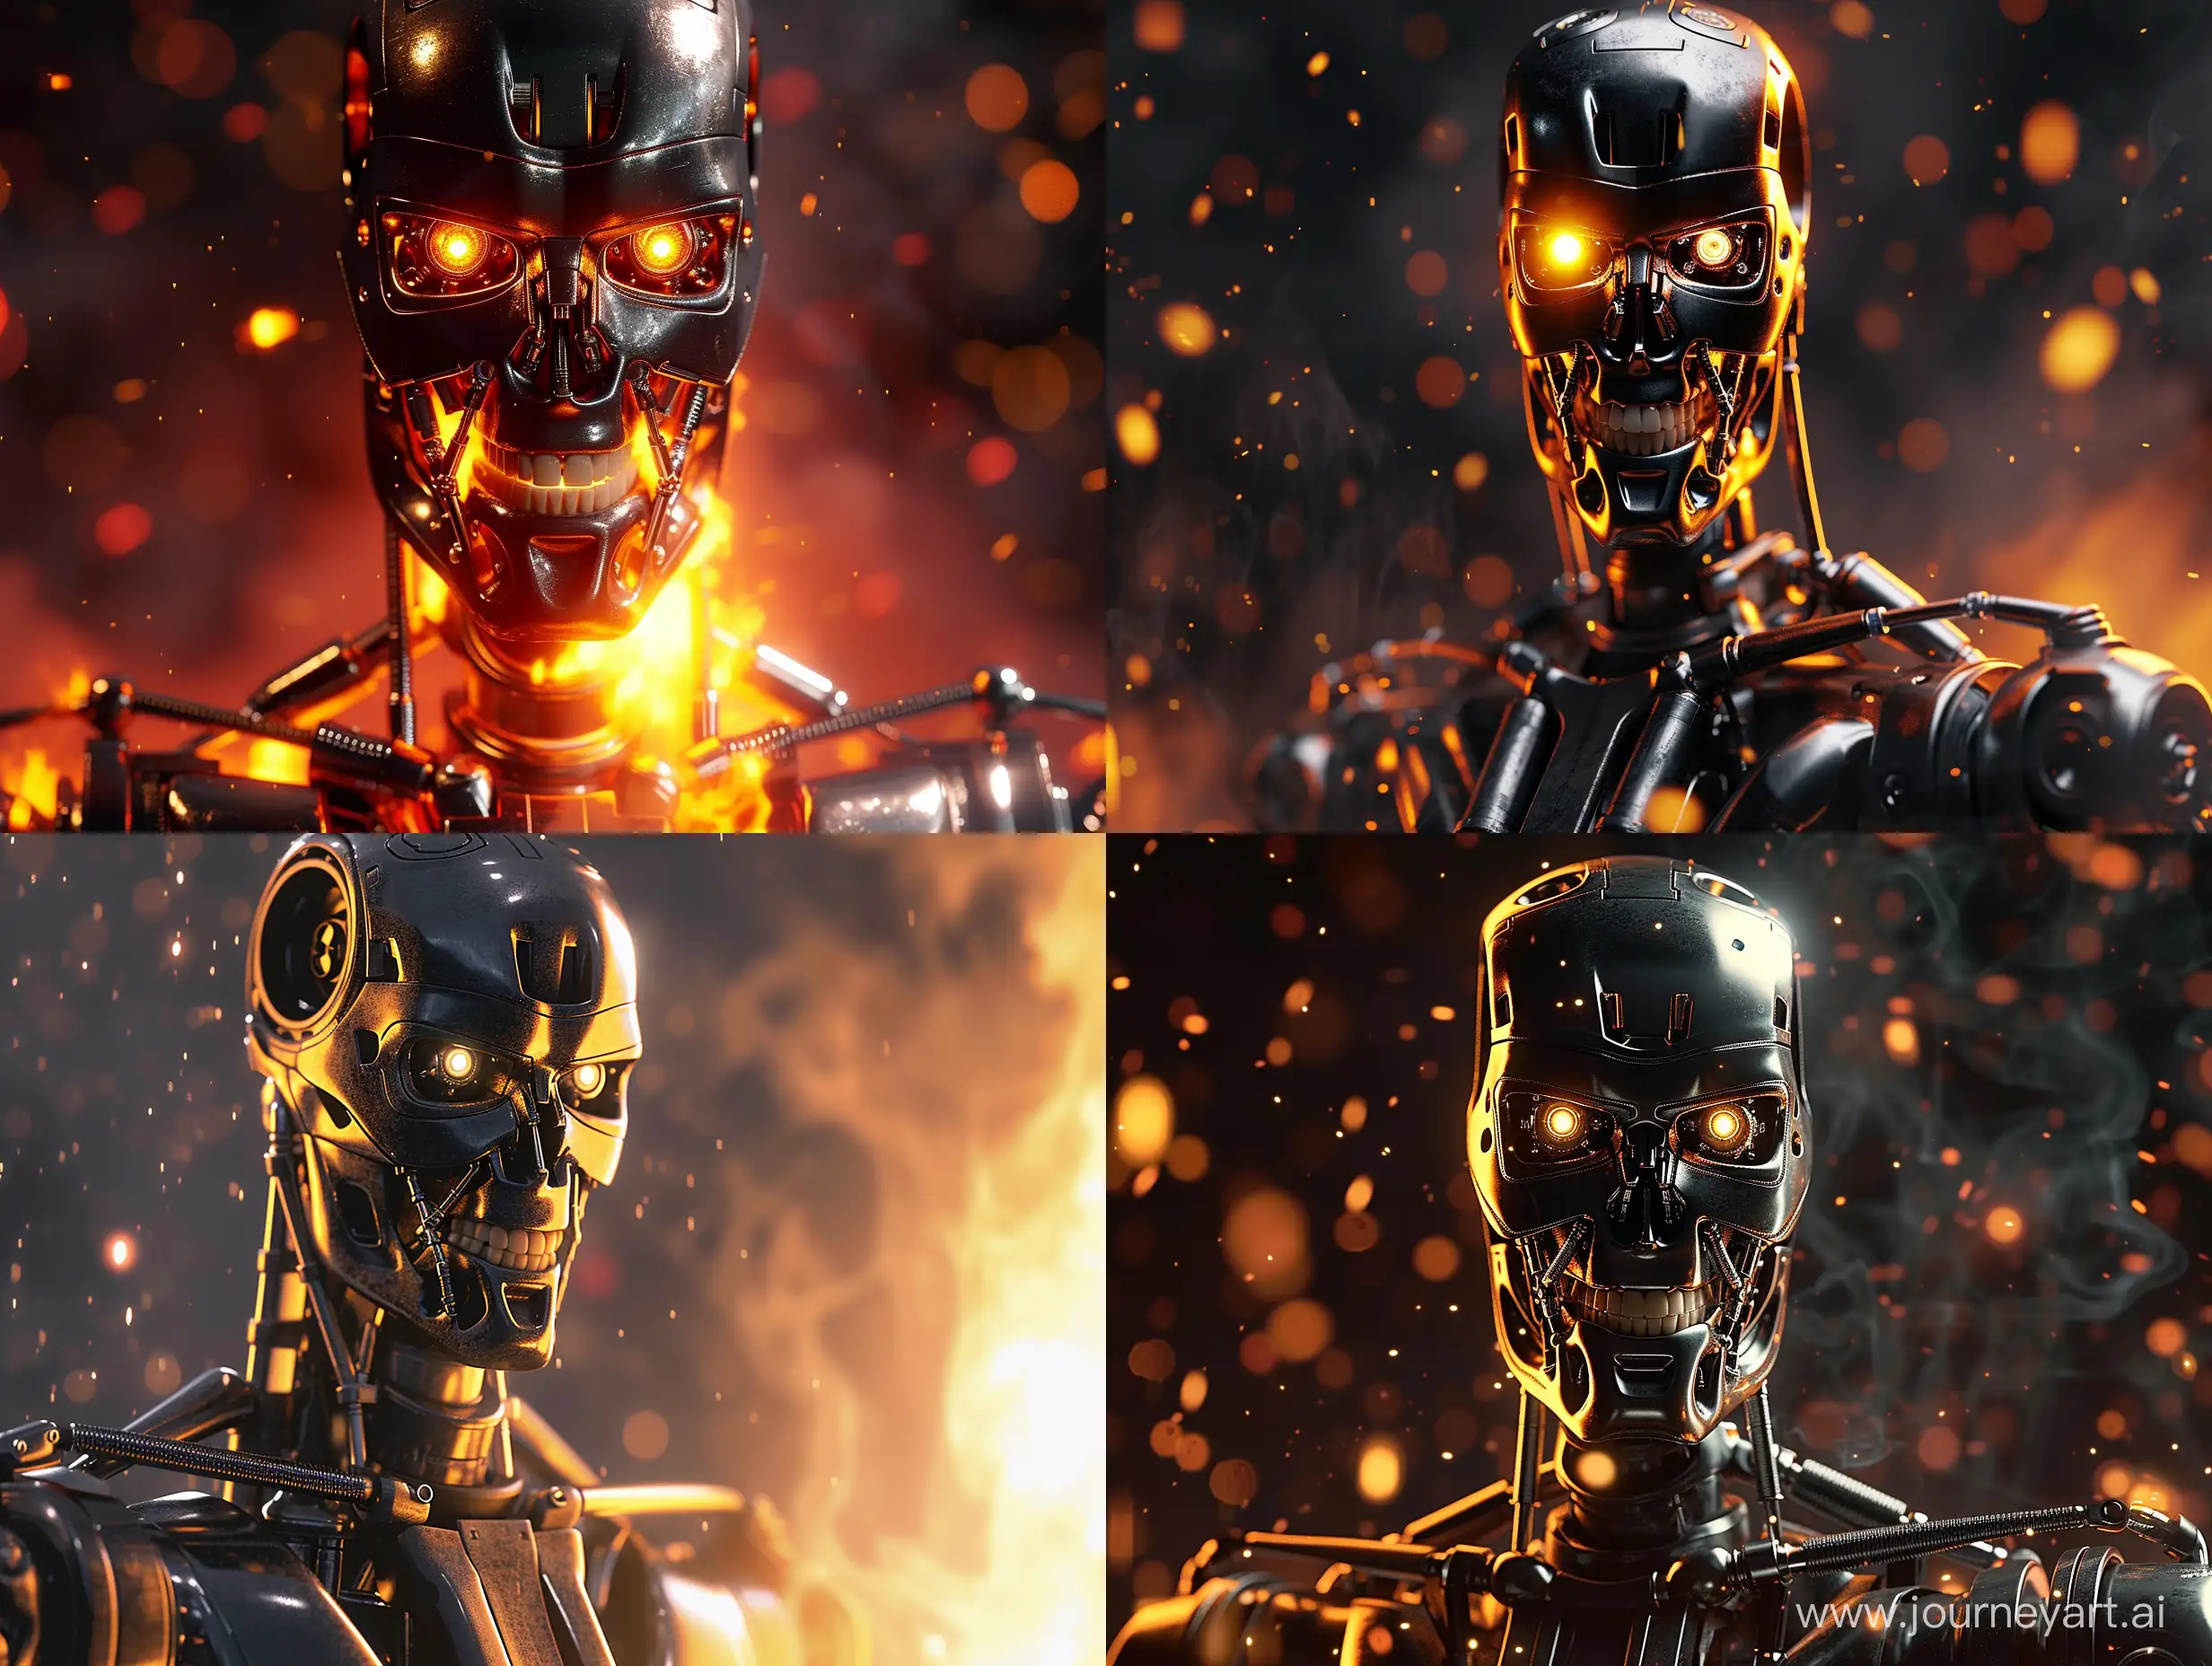 Terminator-Robot-in-Intense-Closeup-Fiery-Photorealism-with-Smoke-and-Reflections